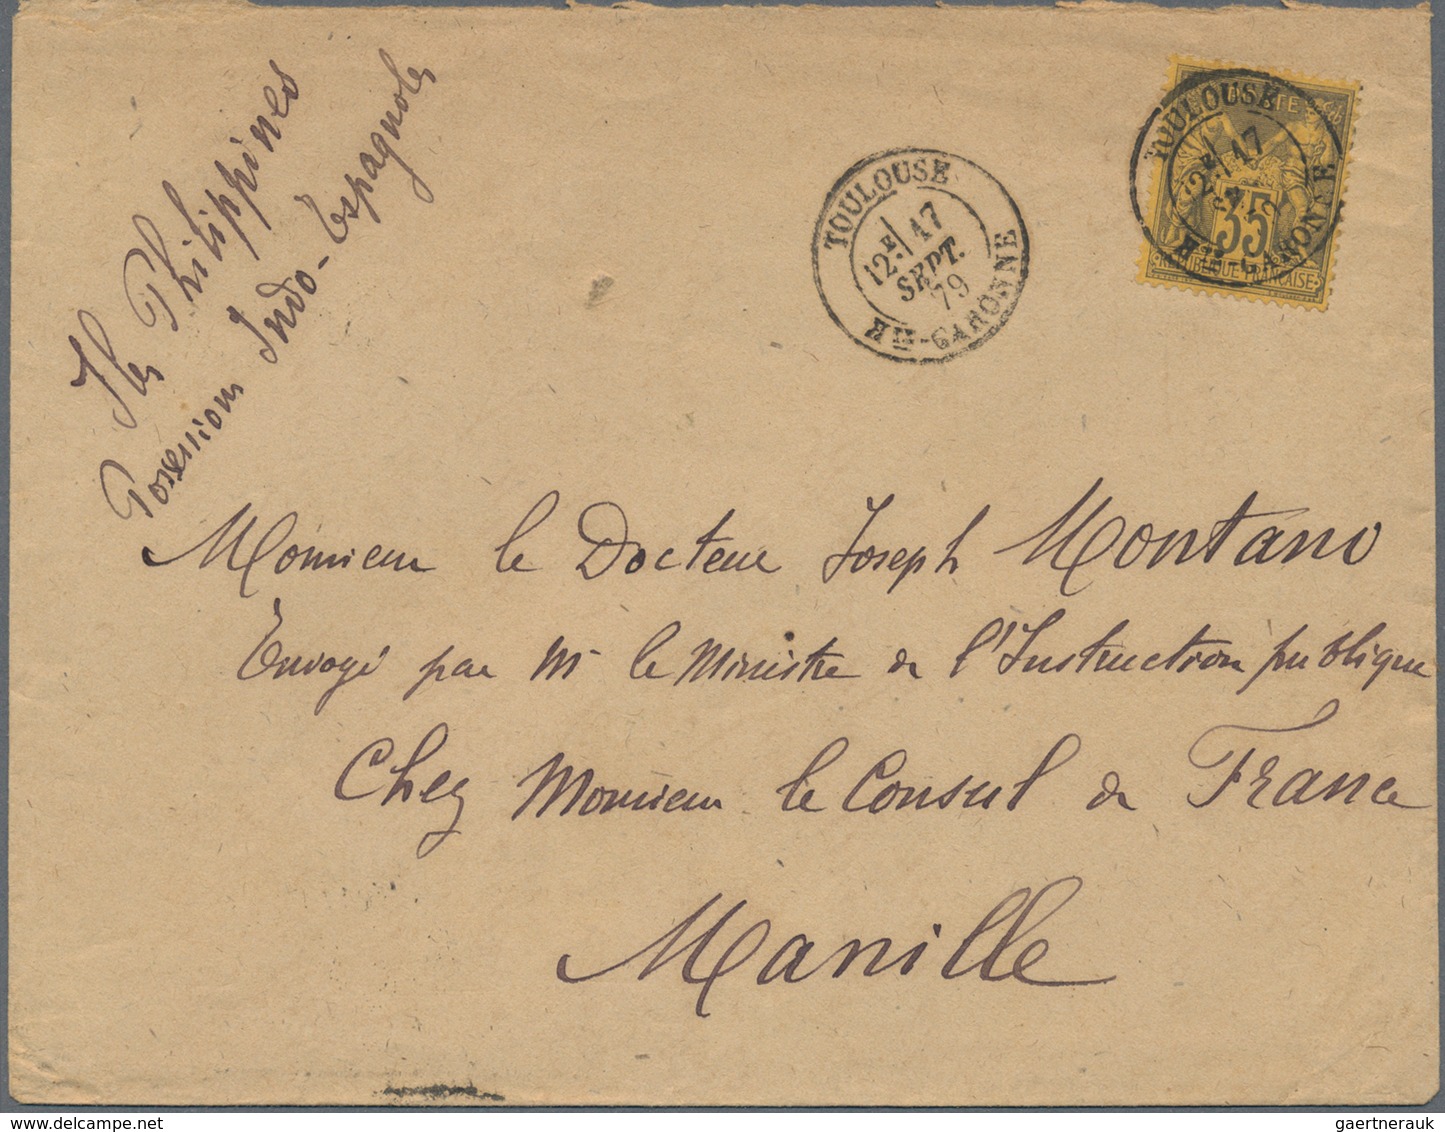 09617 Philippinen: 1879. Envelope Addressed To The French Scientific Mission In Manila, Philippines Bearin - Philippinen